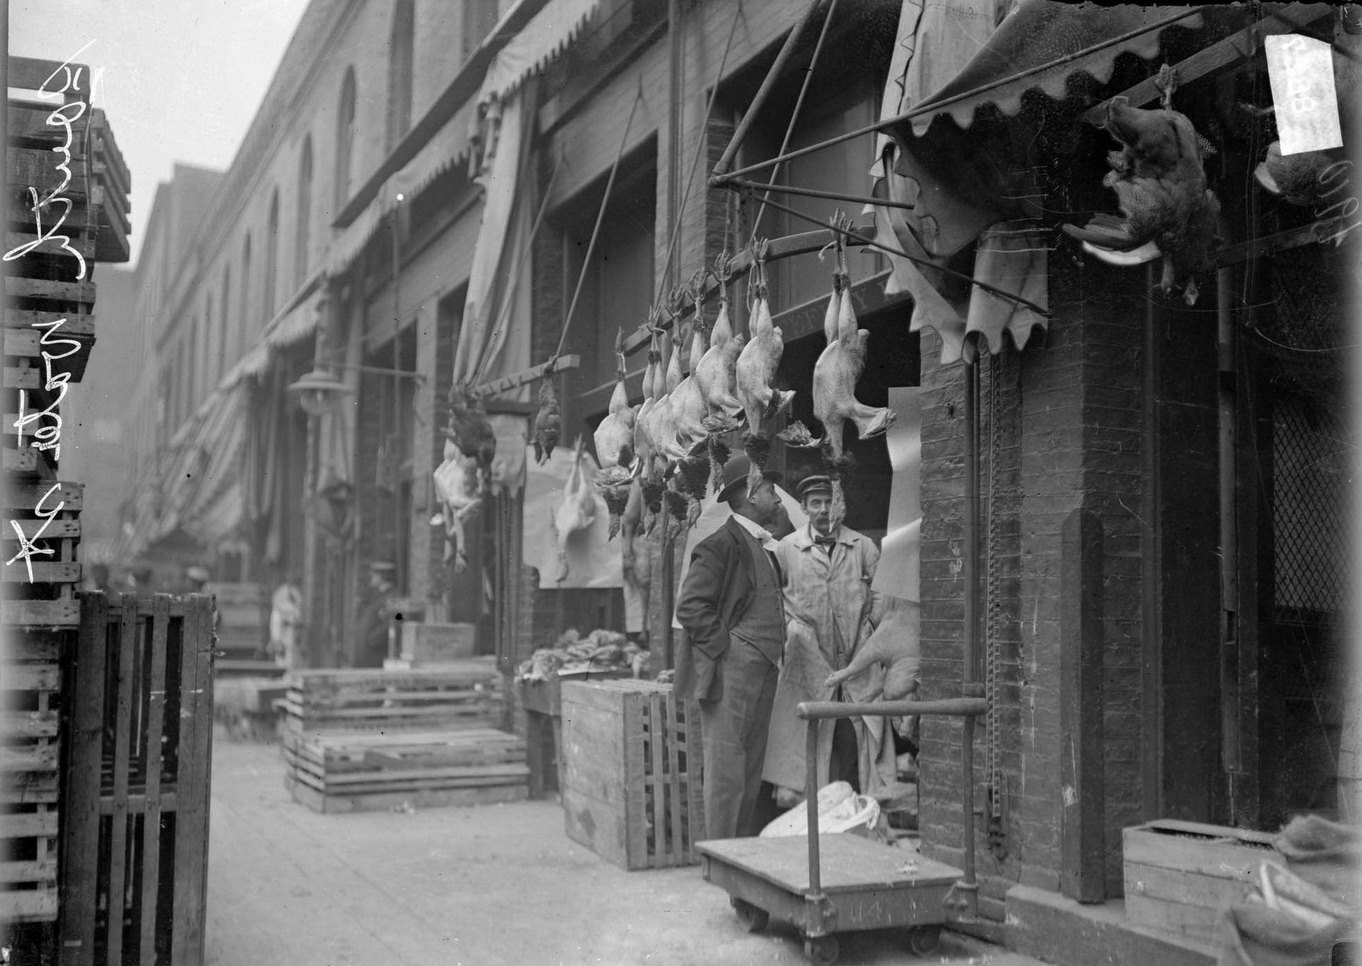 Chickens hanging by the feet from a rack over a door at the South Water Street Market, Chicago, Illinois, 1910s.